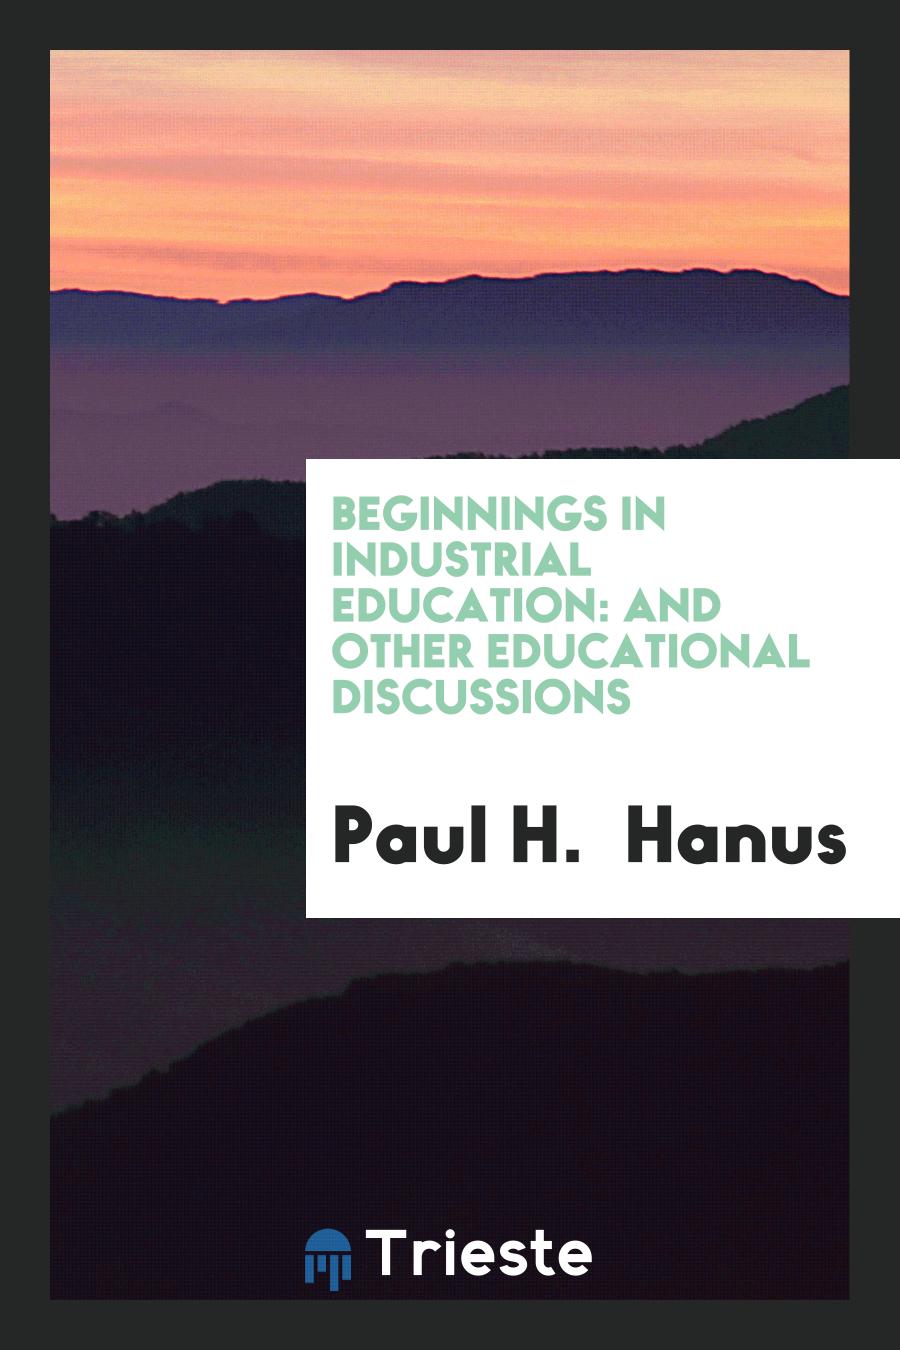 Beginnings in Industrial Education: And Other Educational Discussions